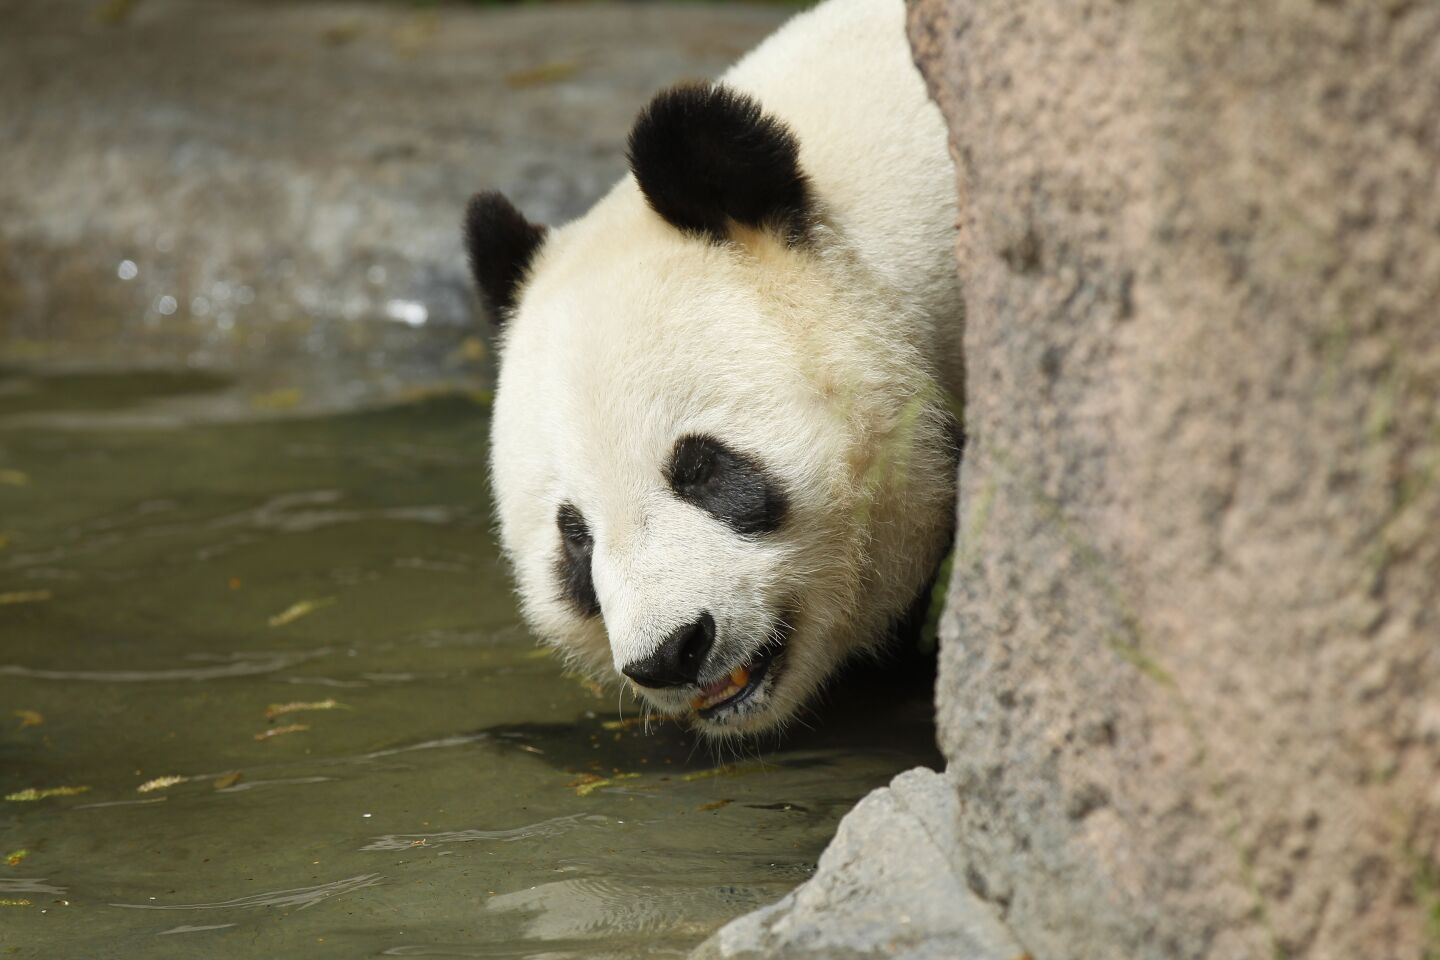 Panda Bai Yun, 27, relaxes in the water in her enclosure at the San Diego Zoo on April 16, 2019. The last public day to see the pandas is April 29th, before they head back to China.